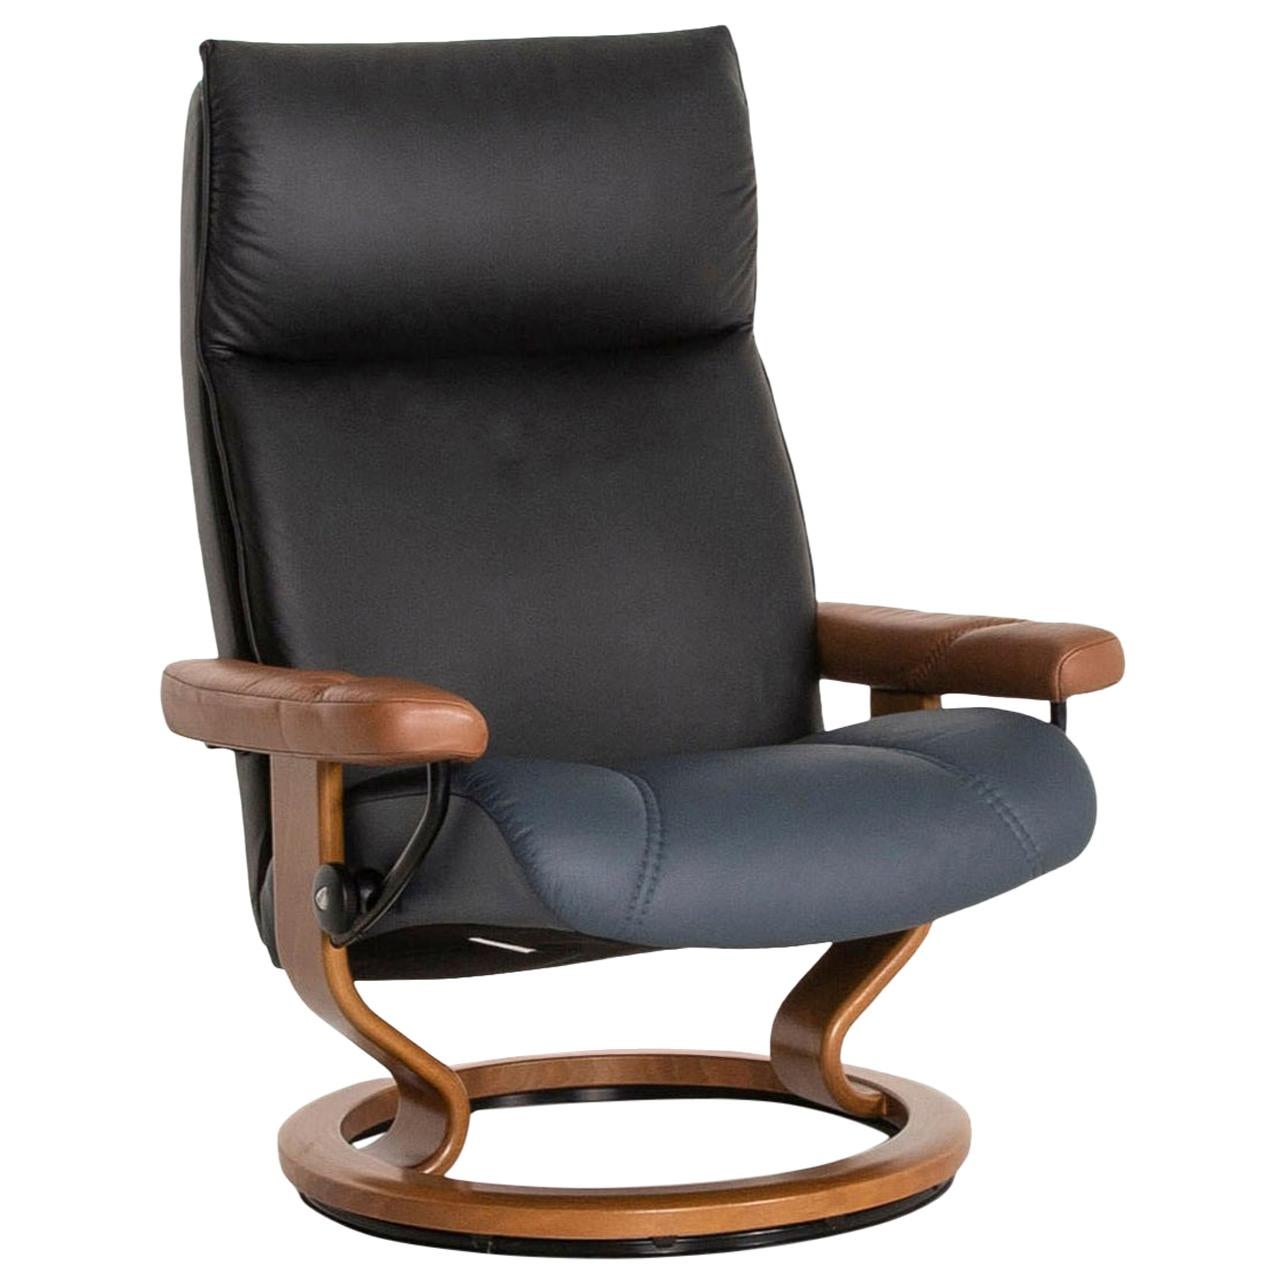 Stressless Consul Leather Armchair Brown Blue Black Function Relax Function